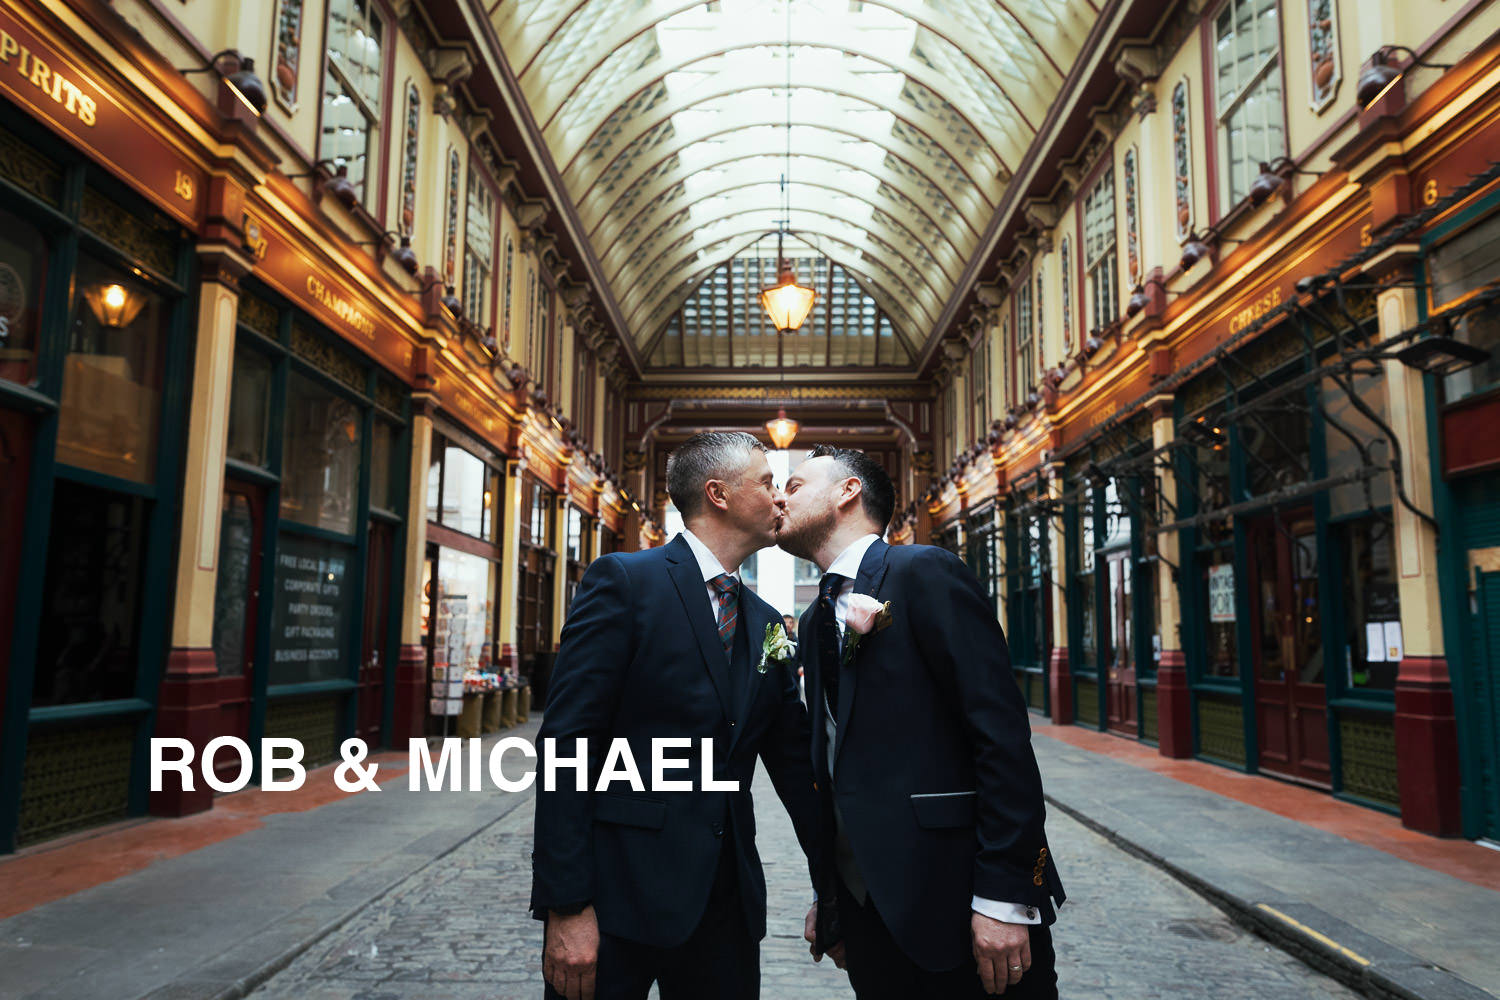 In Leadenhall Market the newly married husbands kiss on the cobbles. EC3V 1LR